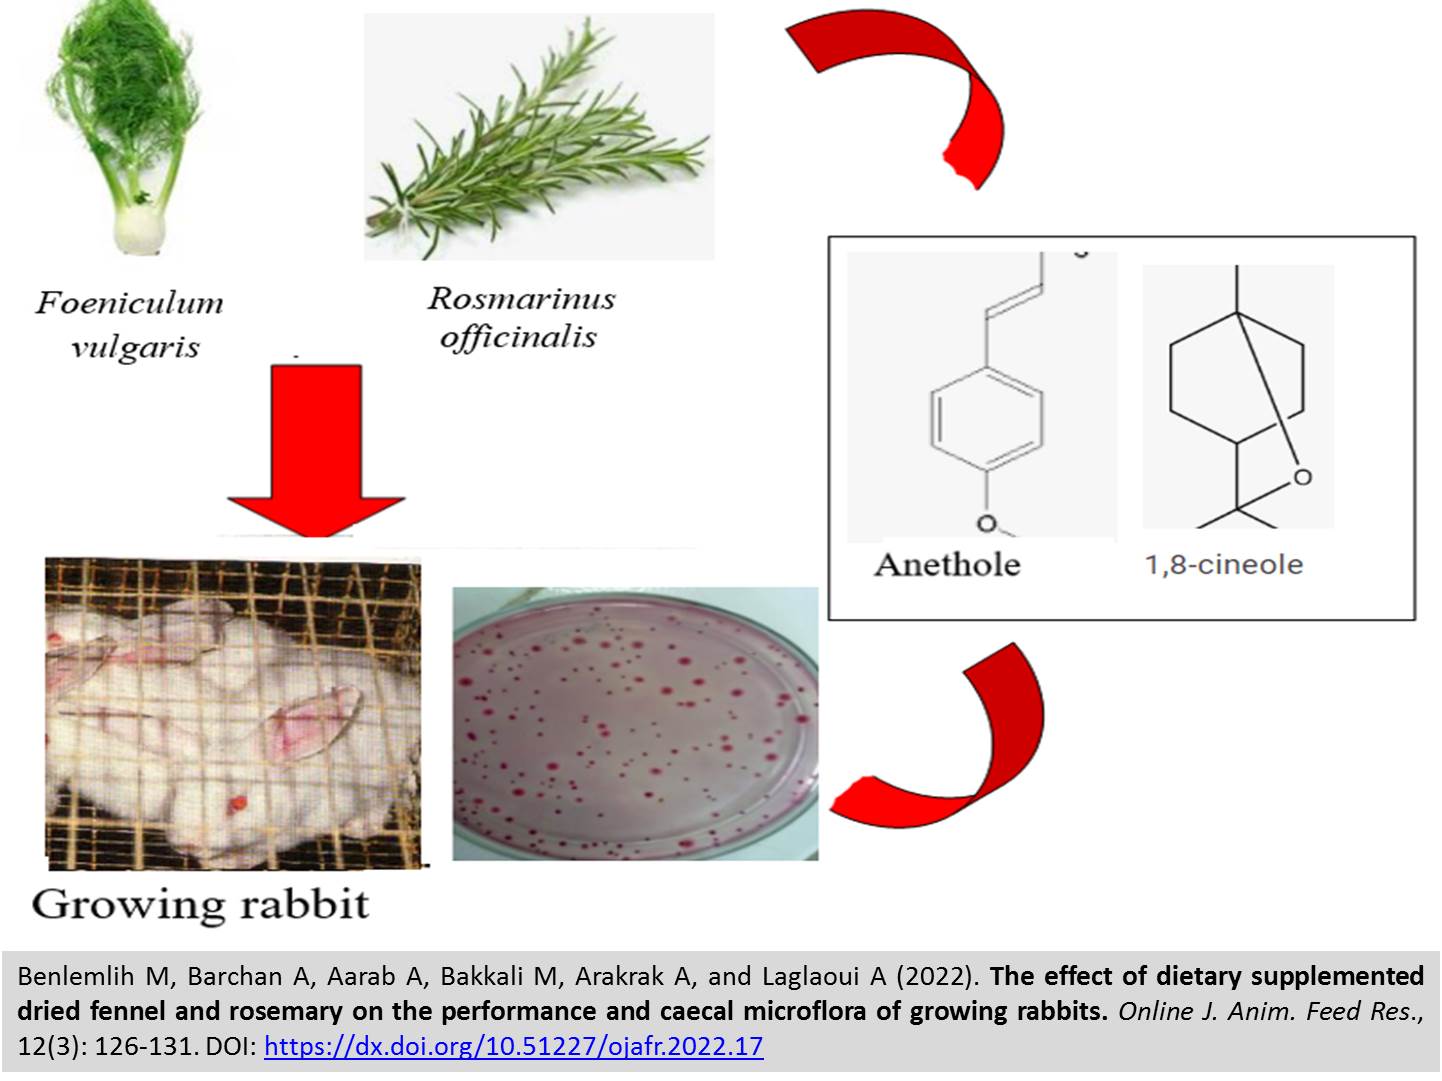 77-_dried_fennel_and_rosemary_on_the_performance_and_caecal_microflora_of_rabbits